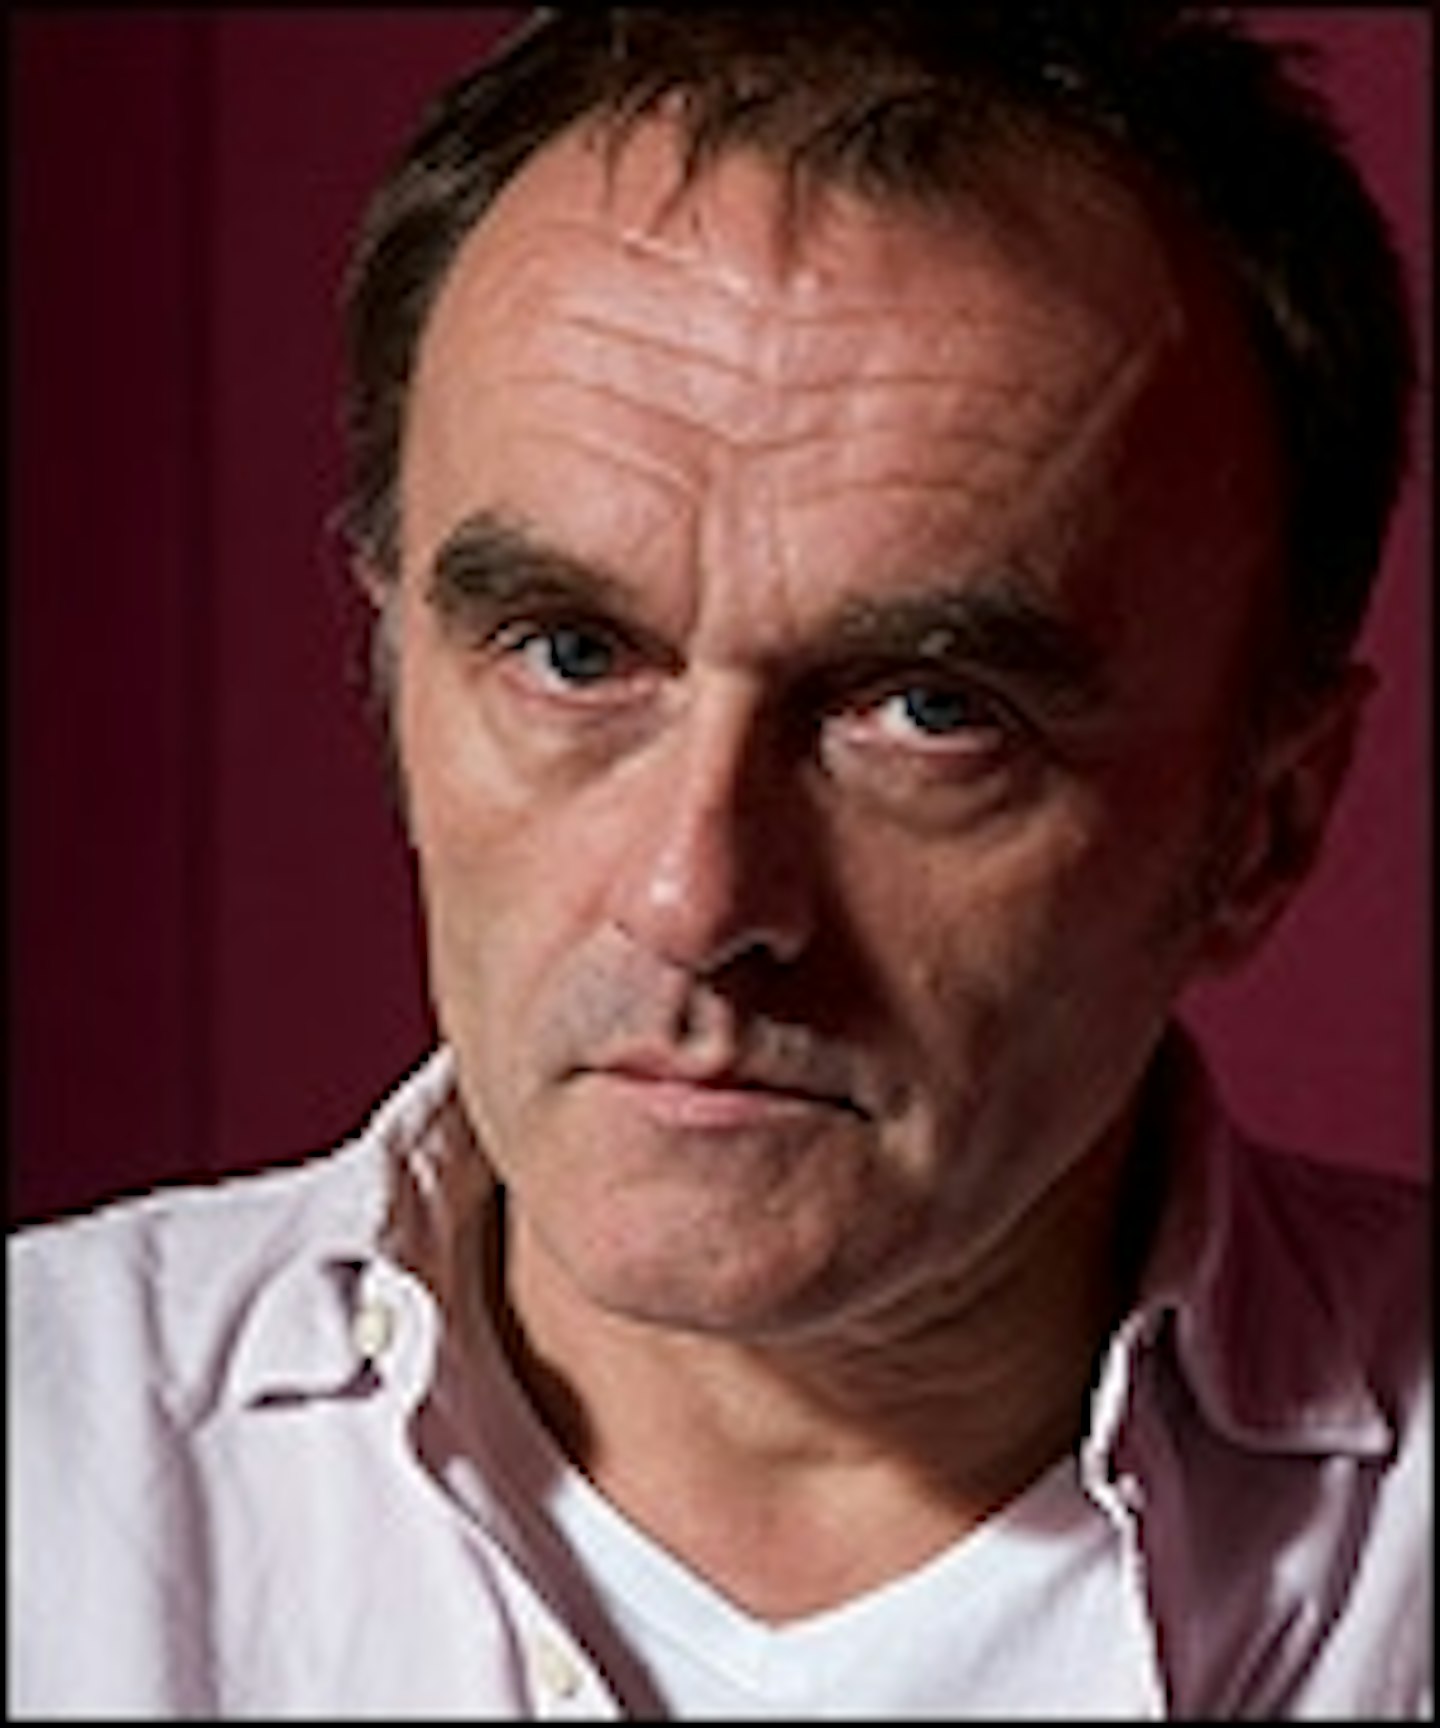 Danny Boyle On His Upcoming Projects